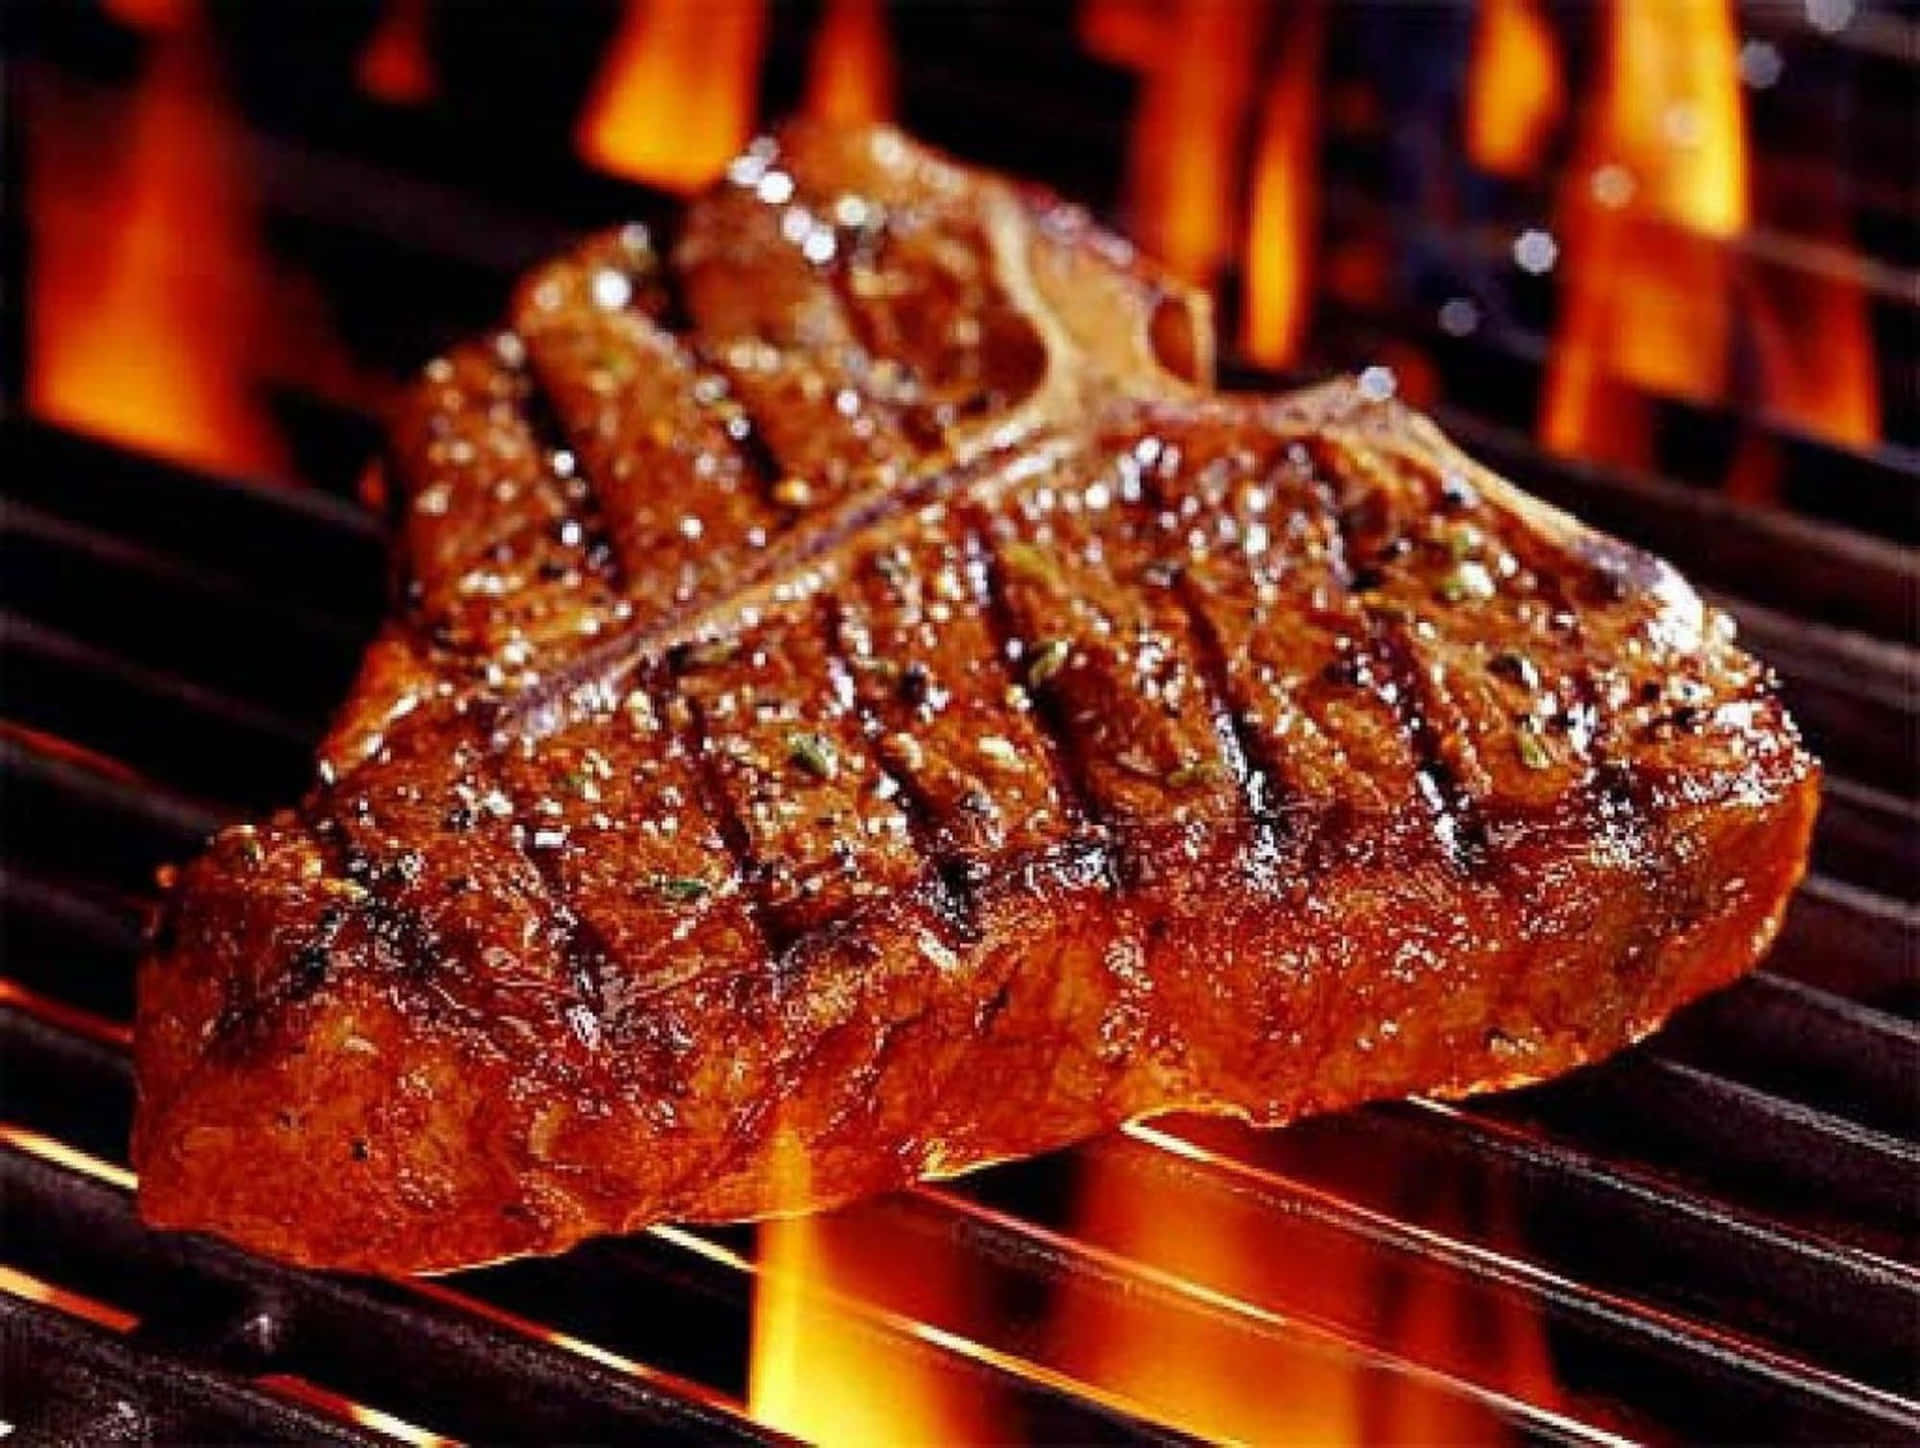 A Steak Is Being Cooked On A Grill With Flames